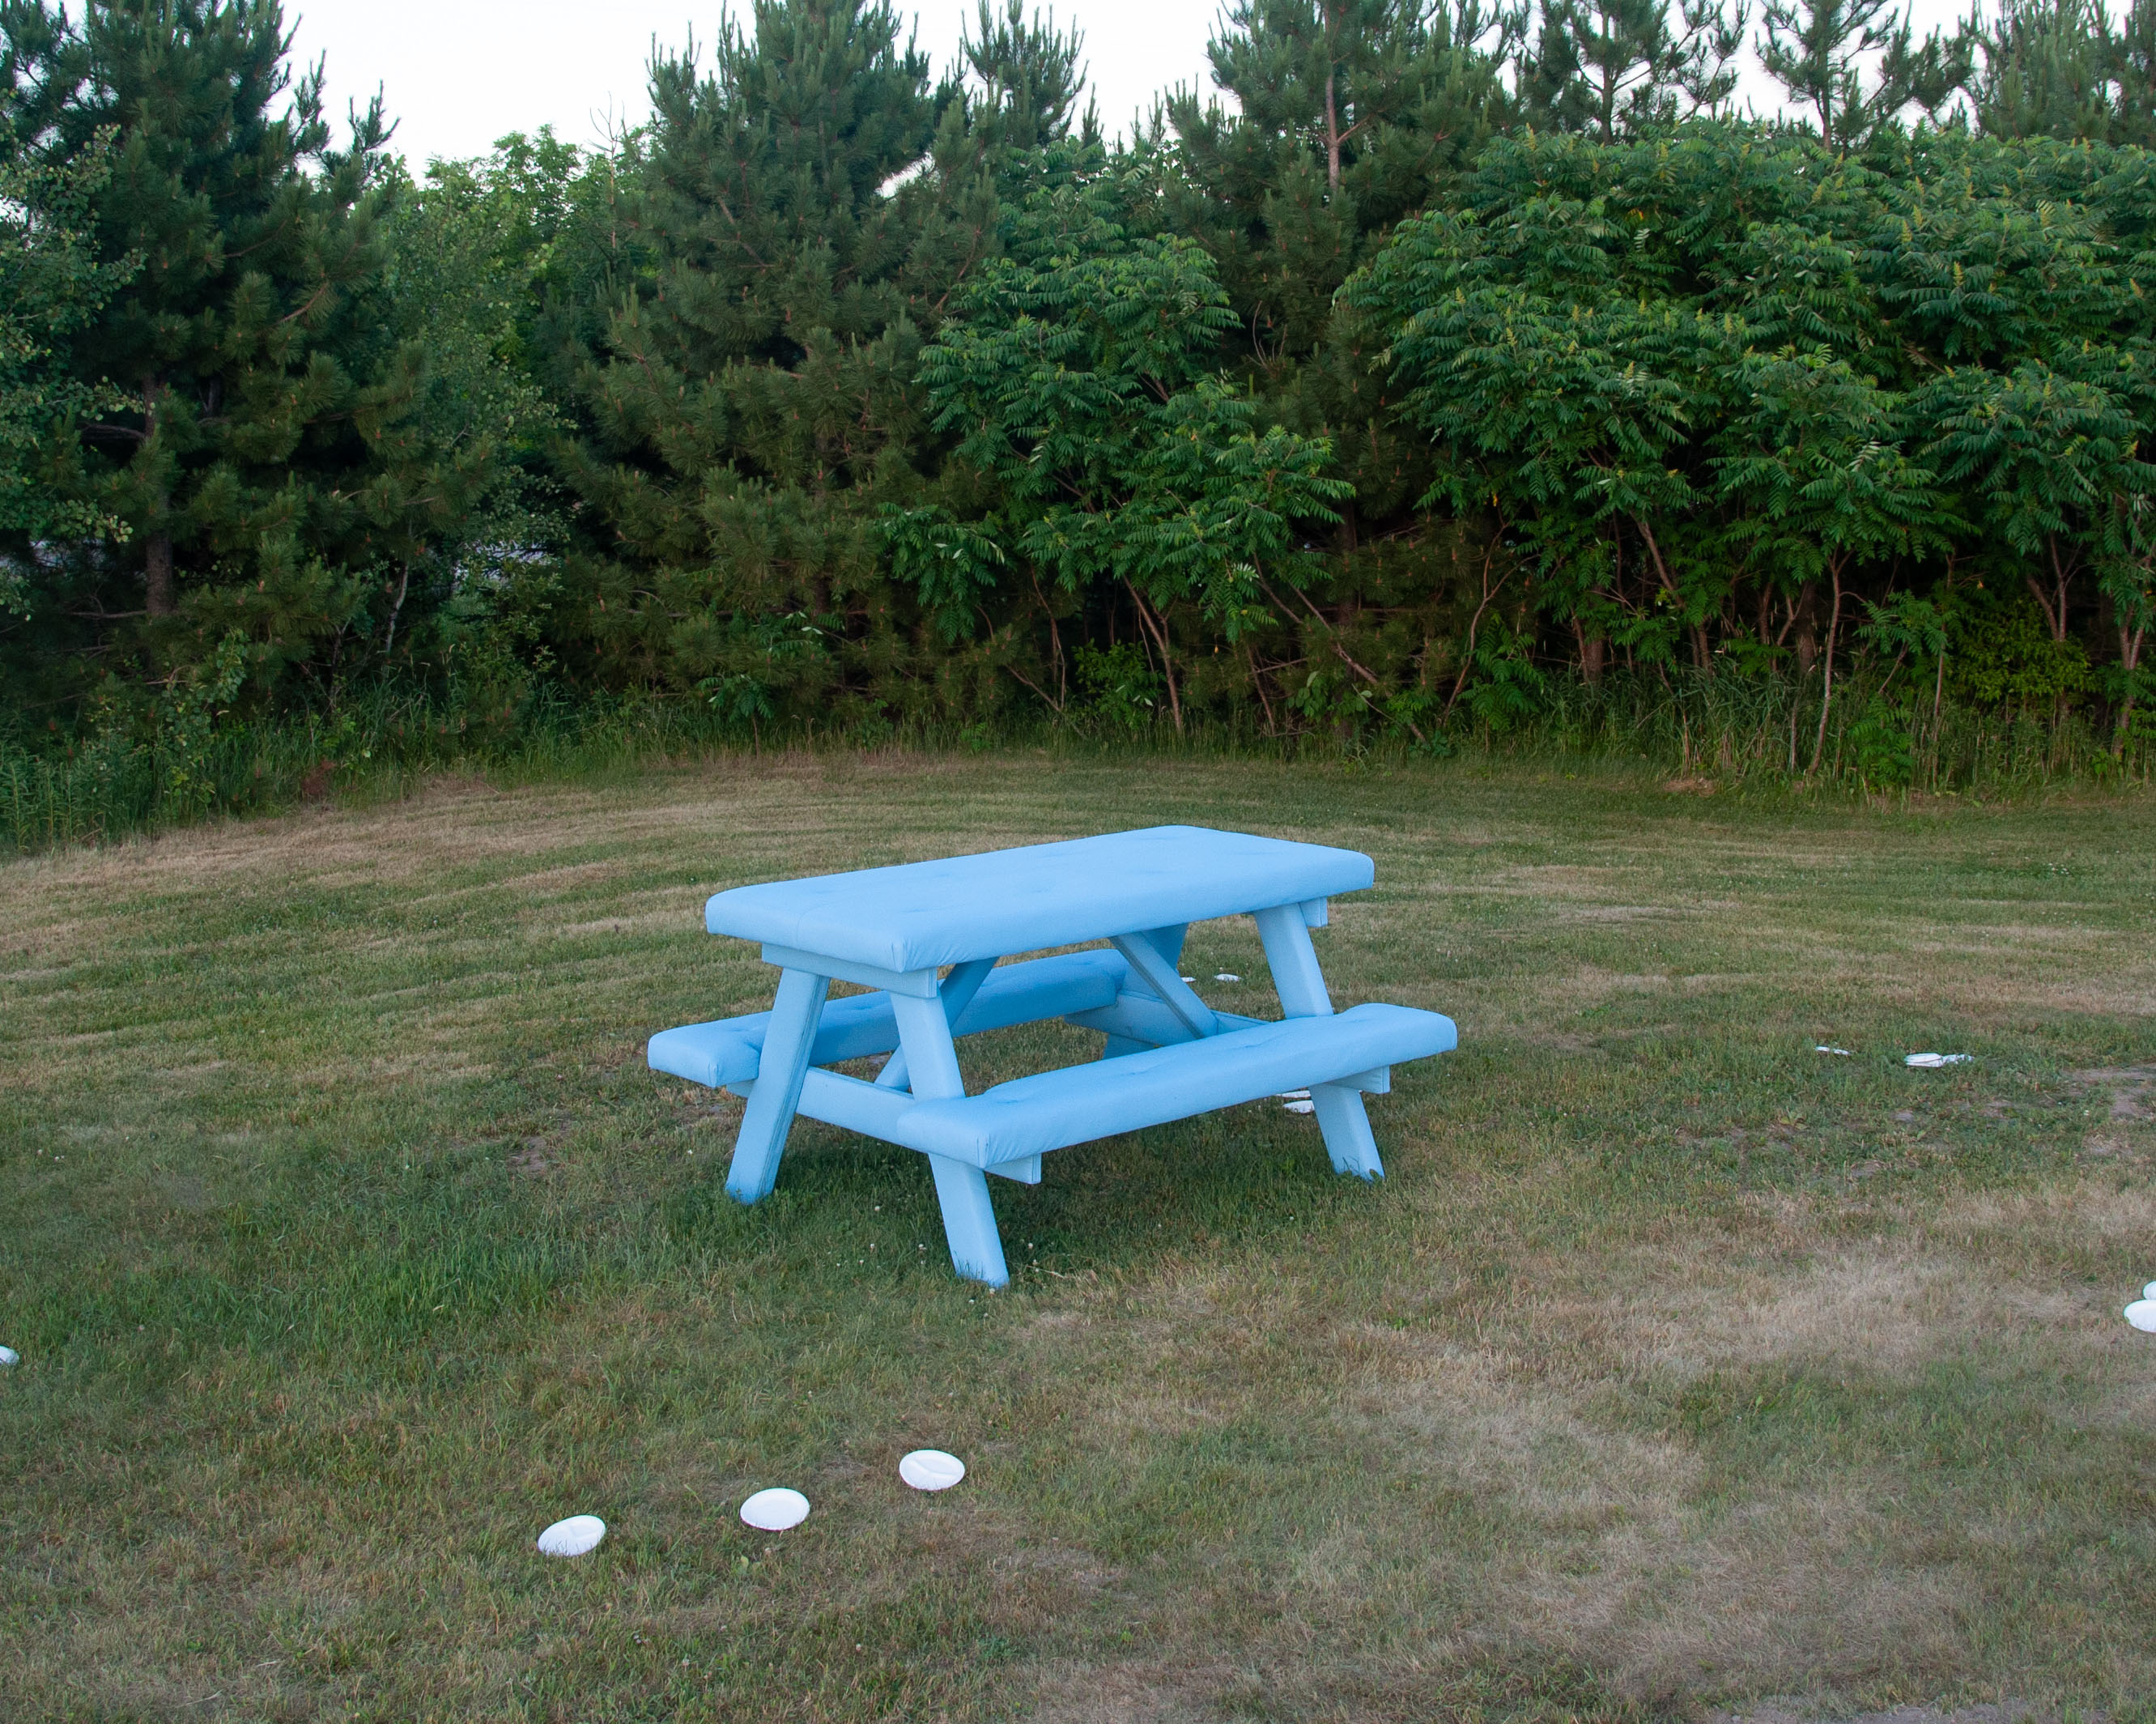 A blue upholstered picnic table in an outdoor space with green grass and tress behind it. Three white ceramic plates are laid in a row on the ground in front of it.